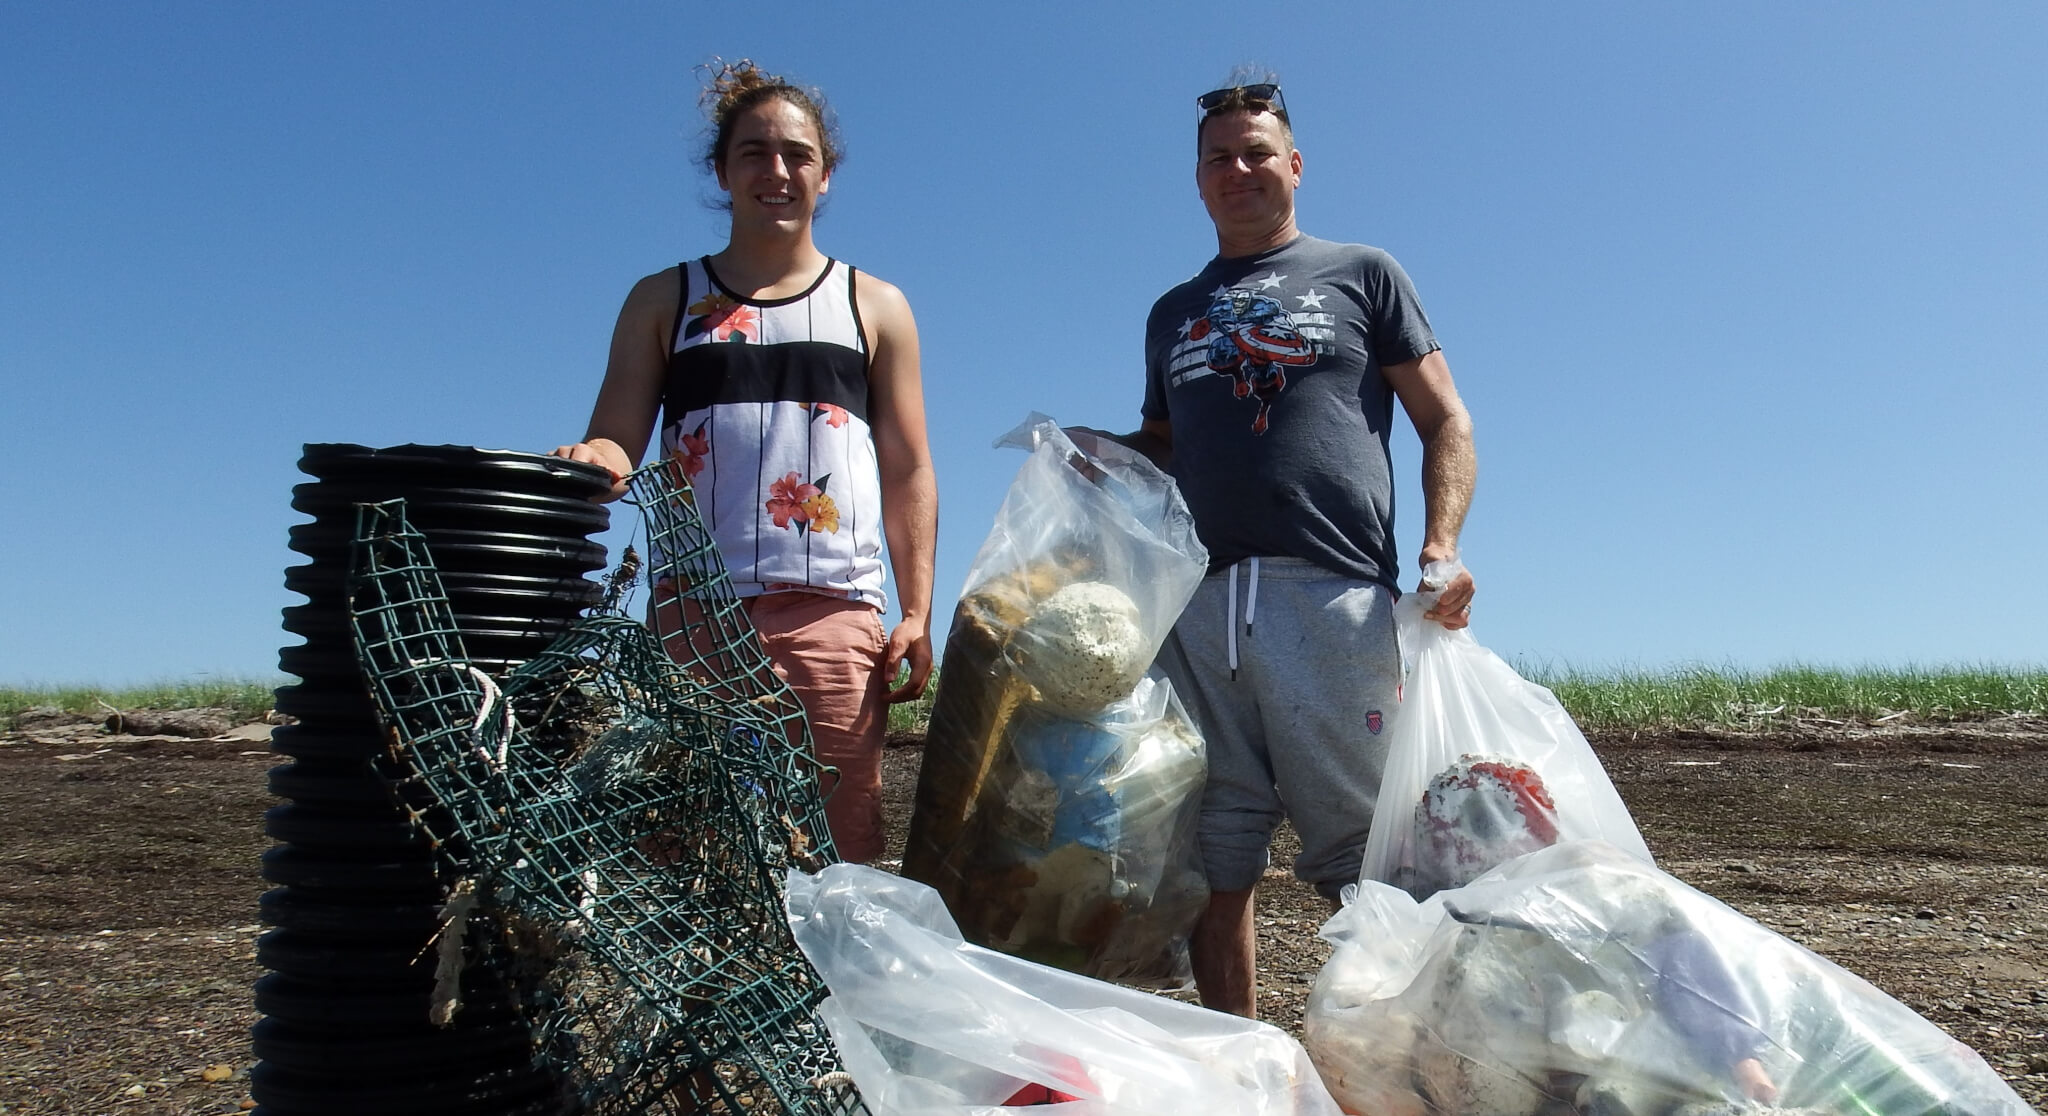 Summer student and Lewnnany collect trash on the beach